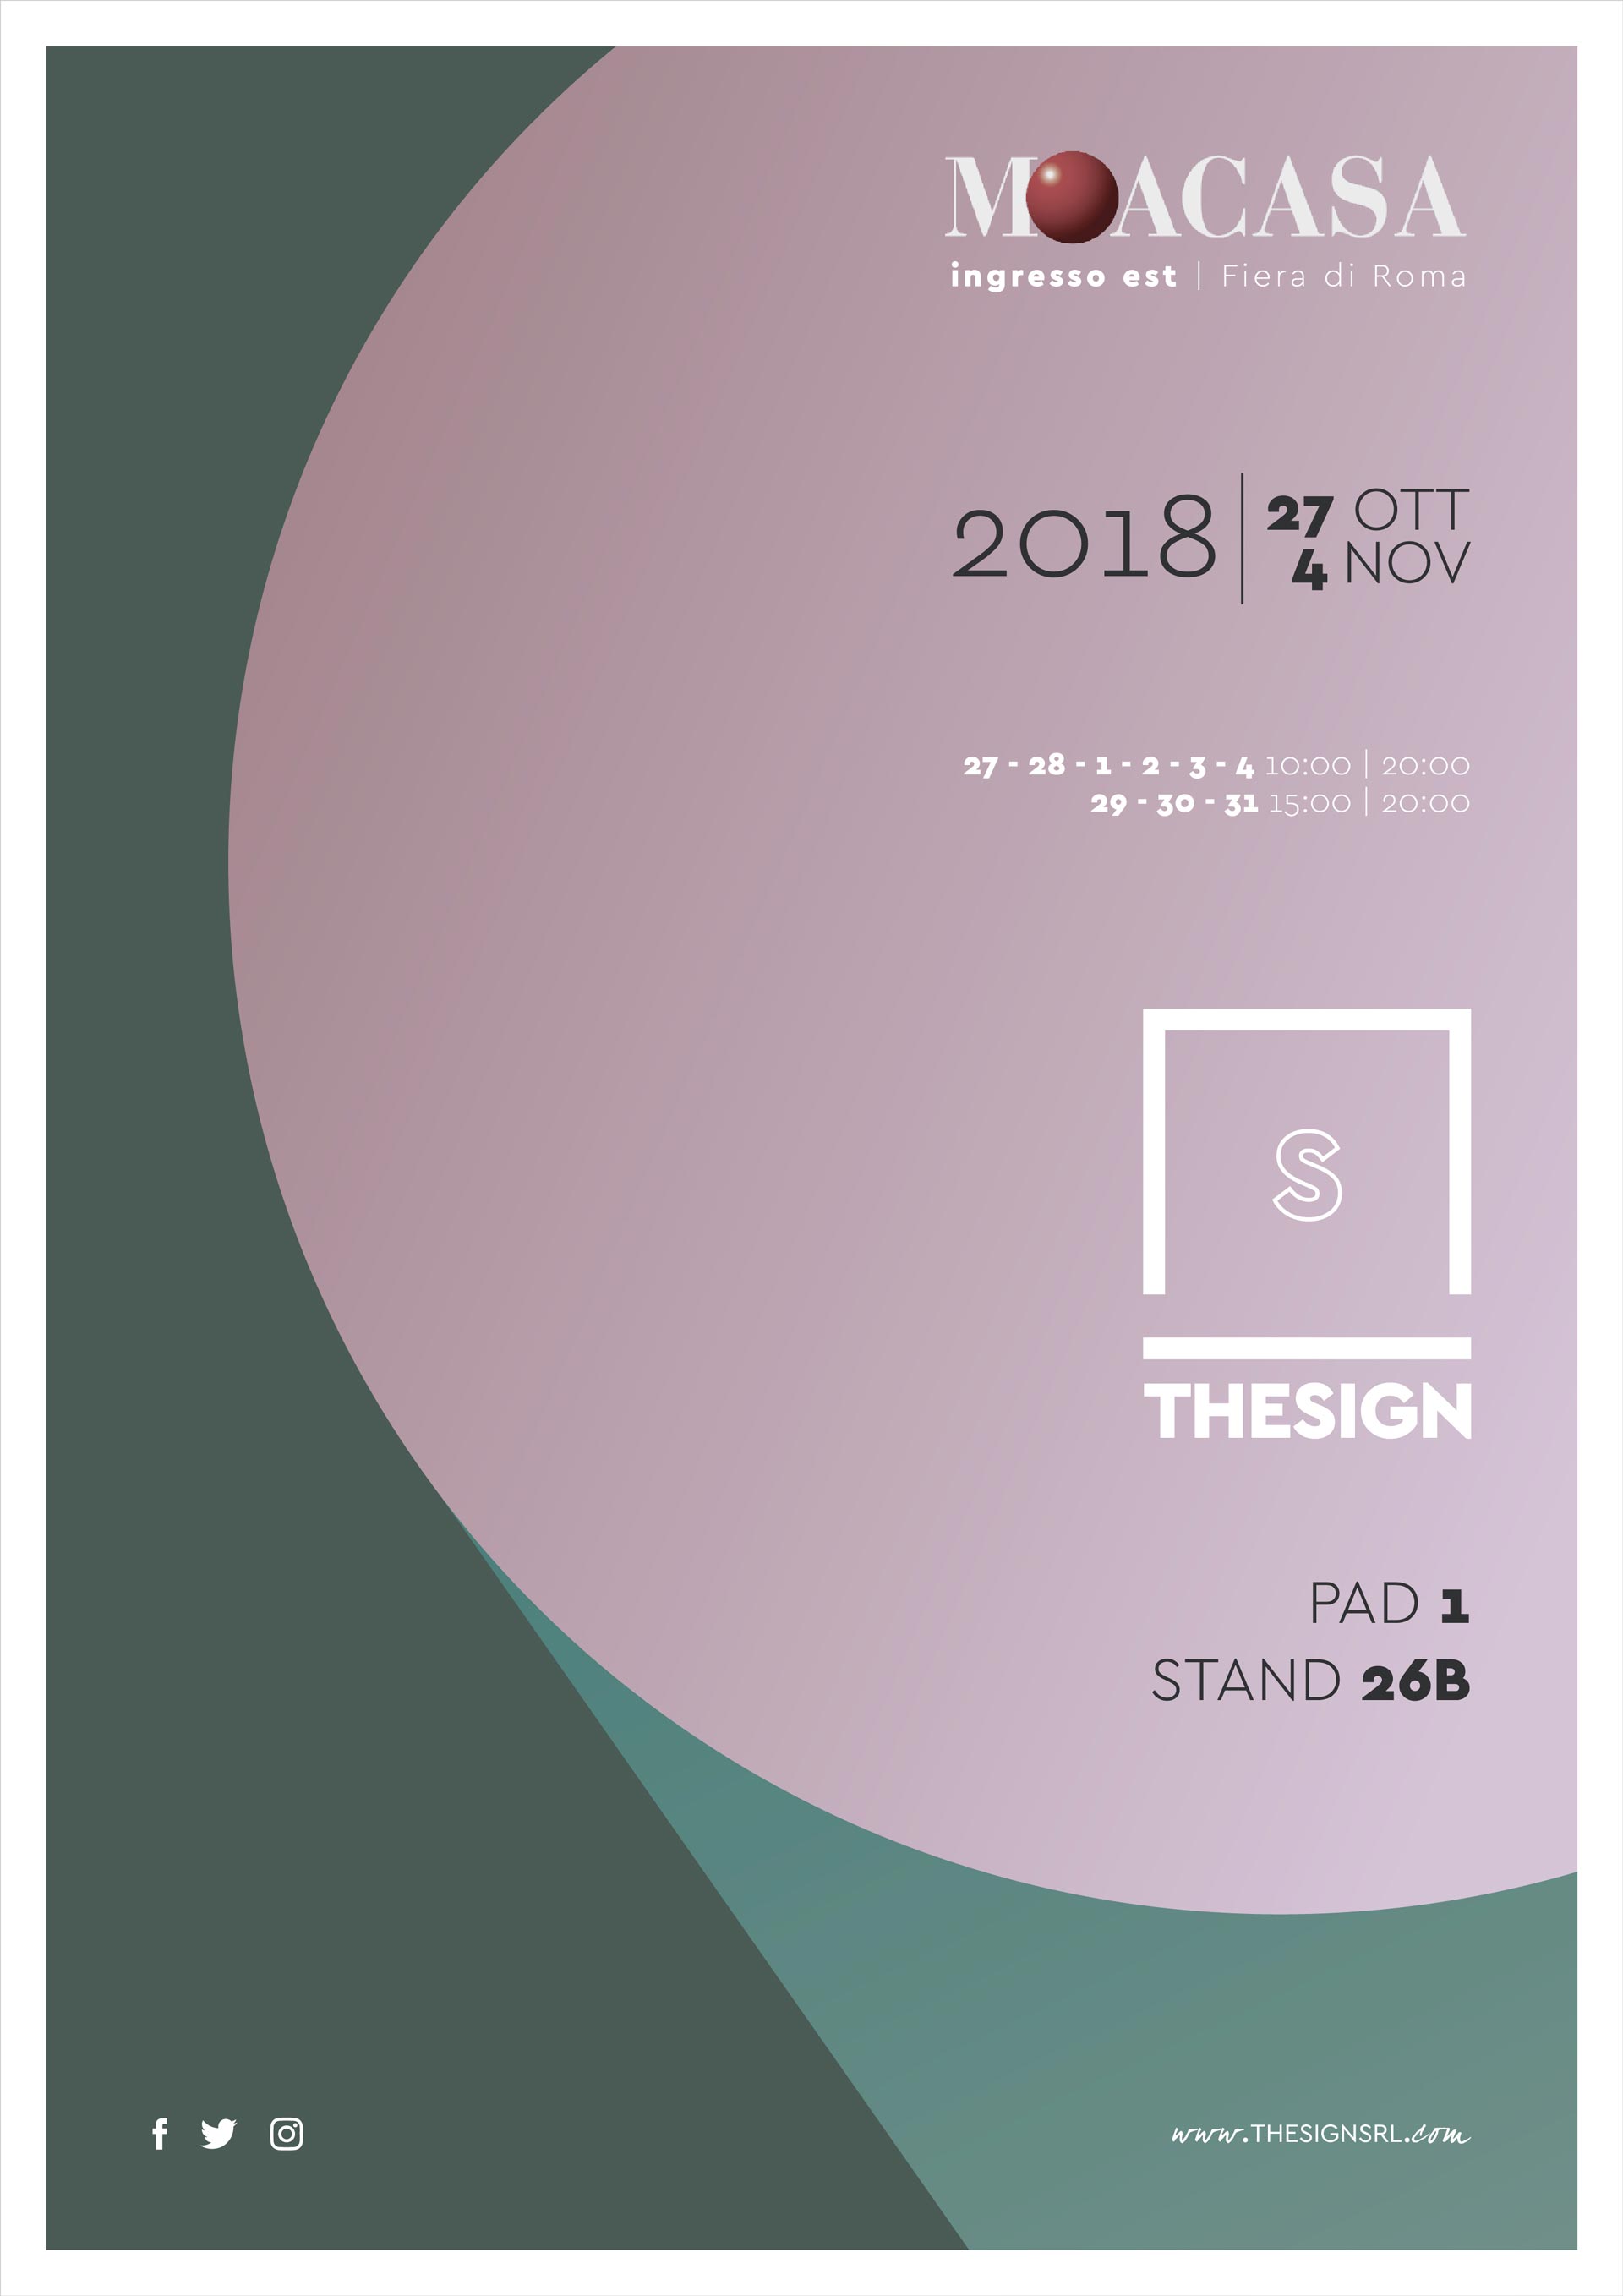 18/10/2018 Cantori at Moacasa 2018 with Thesign - Cantori